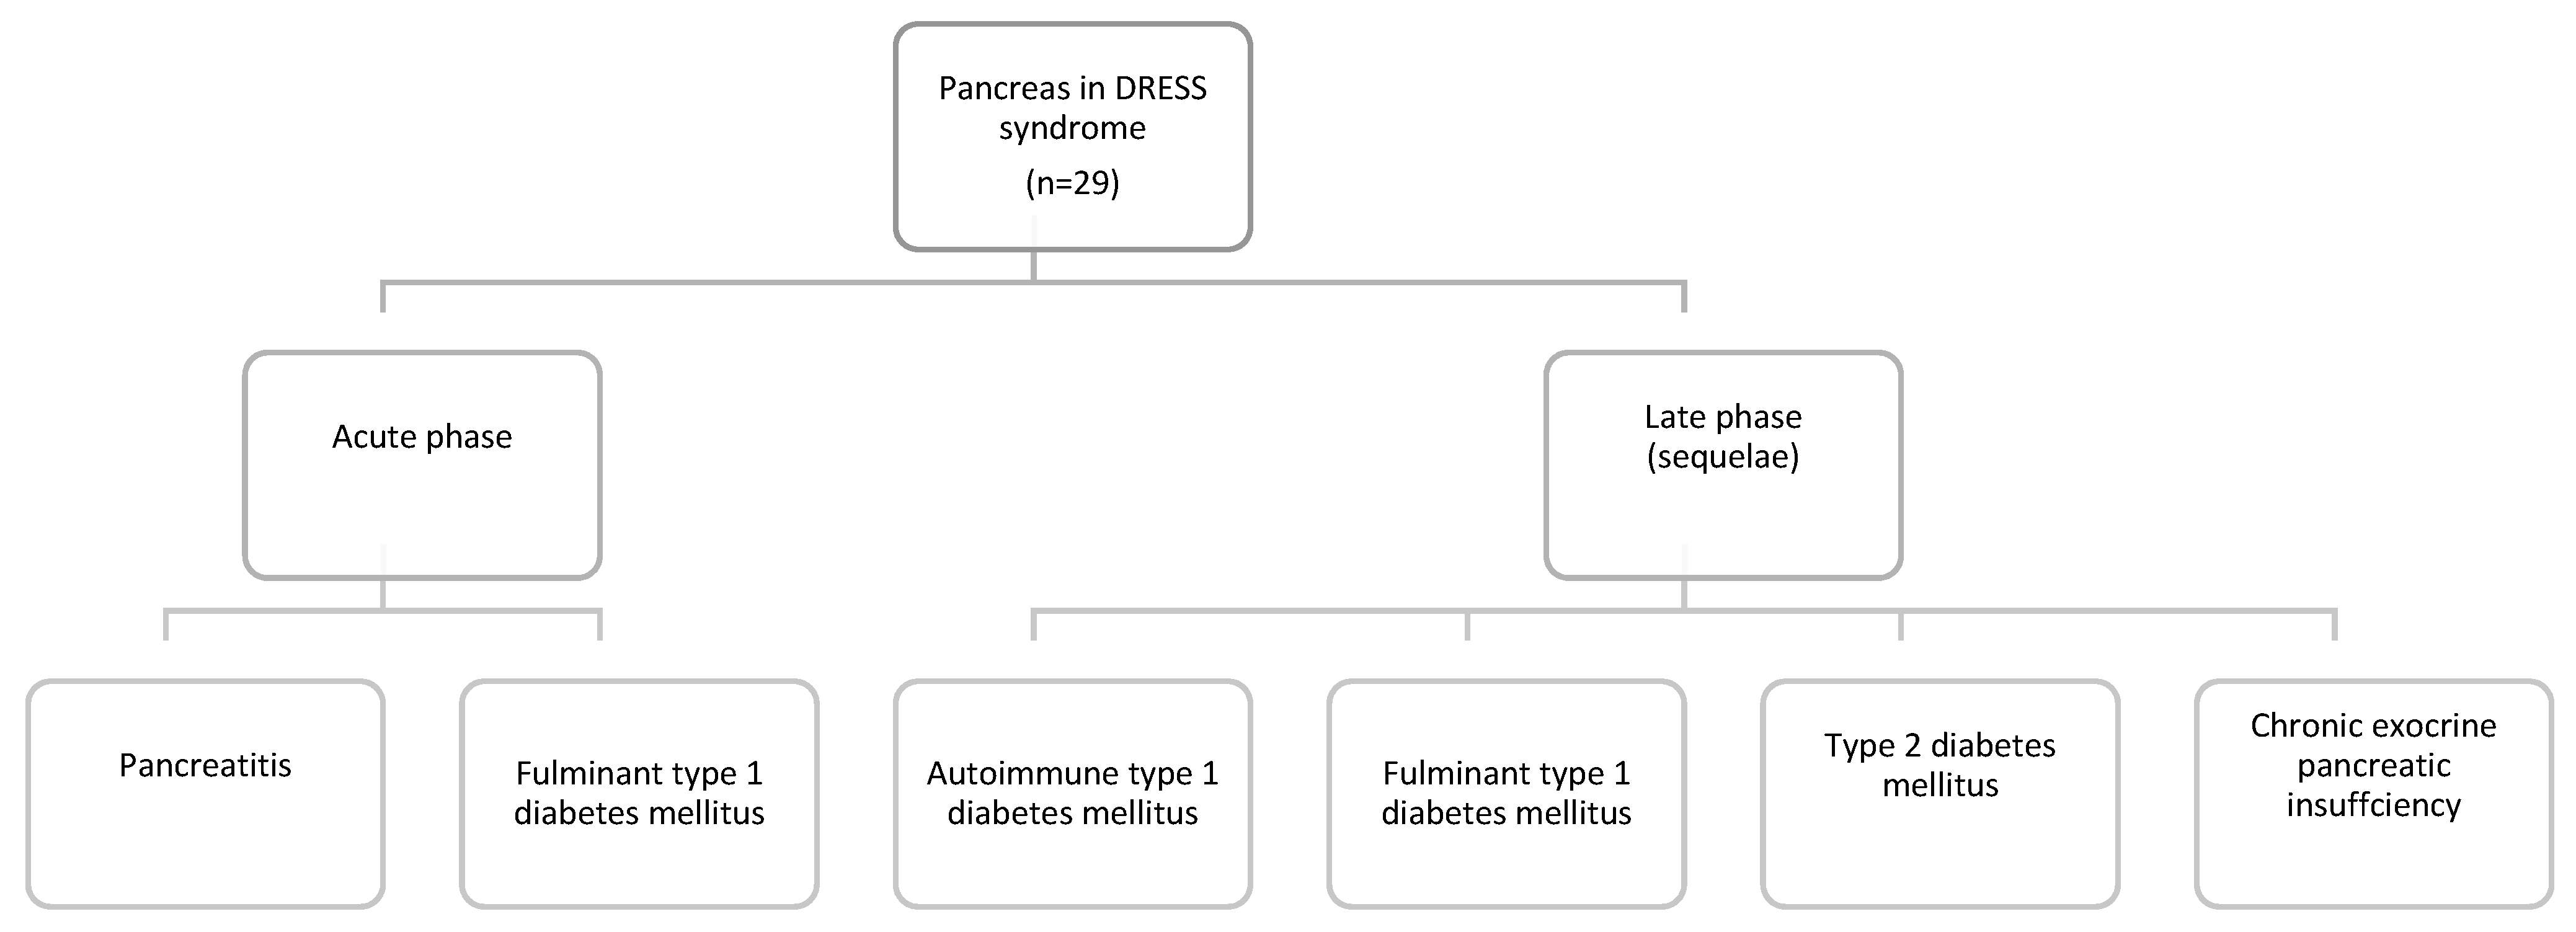 Jcm Free Full Text Less Known Gastrointestinal Manifestations Of Drug Reaction With Eosinophilia And Systemic Symptoms Dress Syndrome A Systematic Review Of The Literature Html